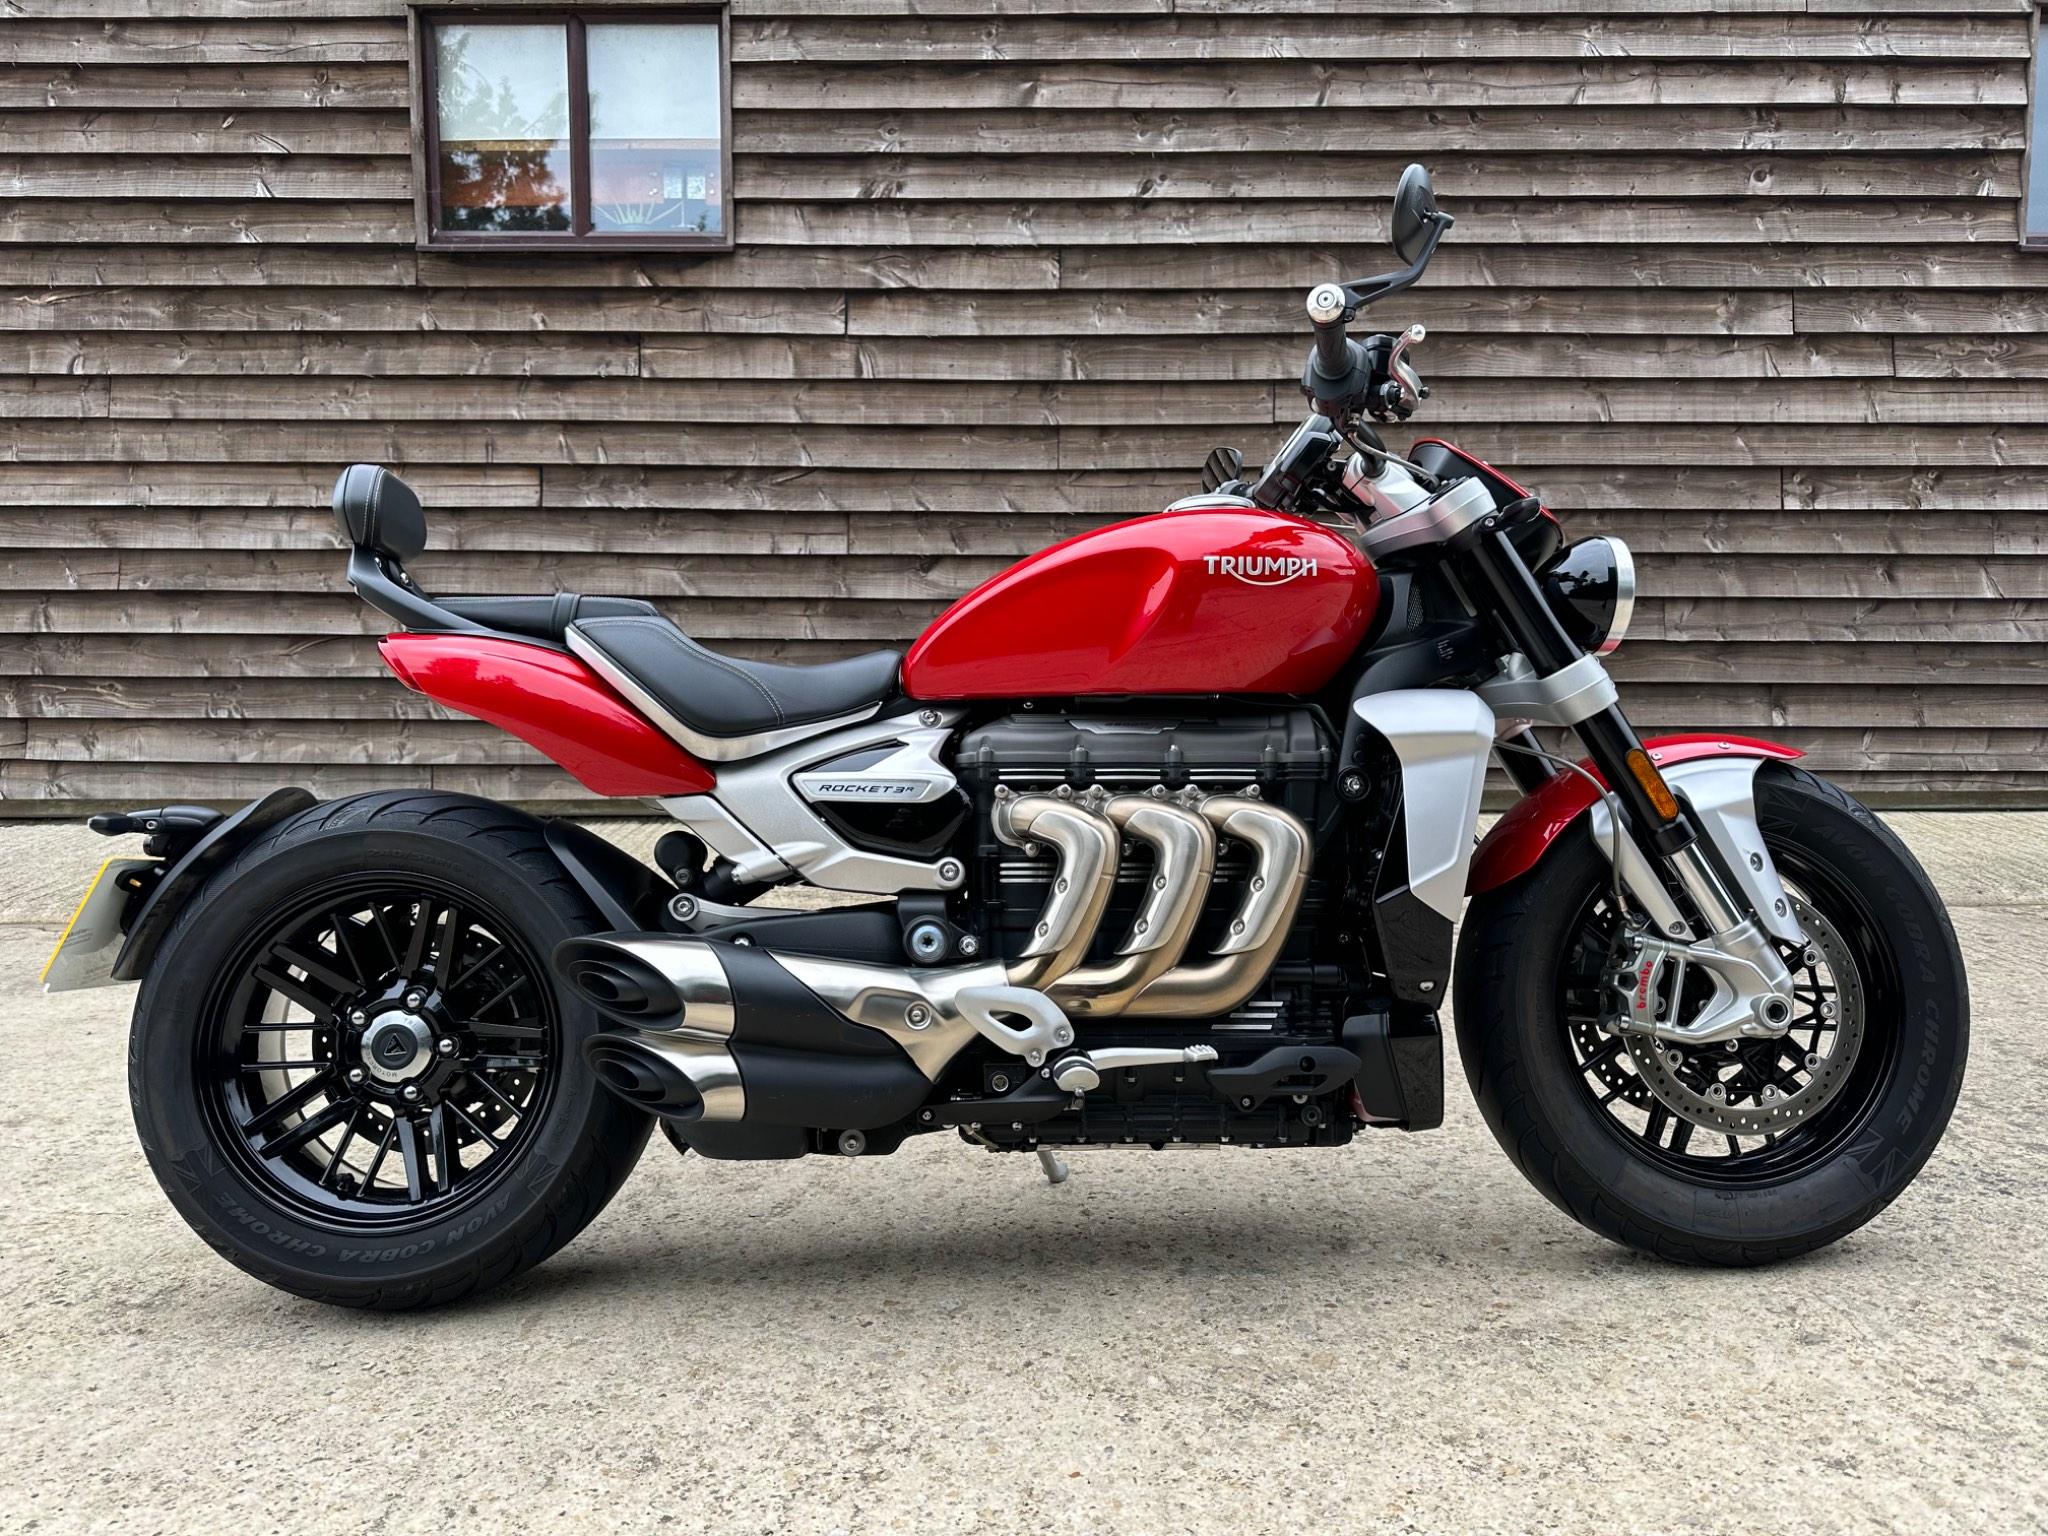 2021 Triumph Rocket III 2500 ABS 3 R From £324.98 per month 